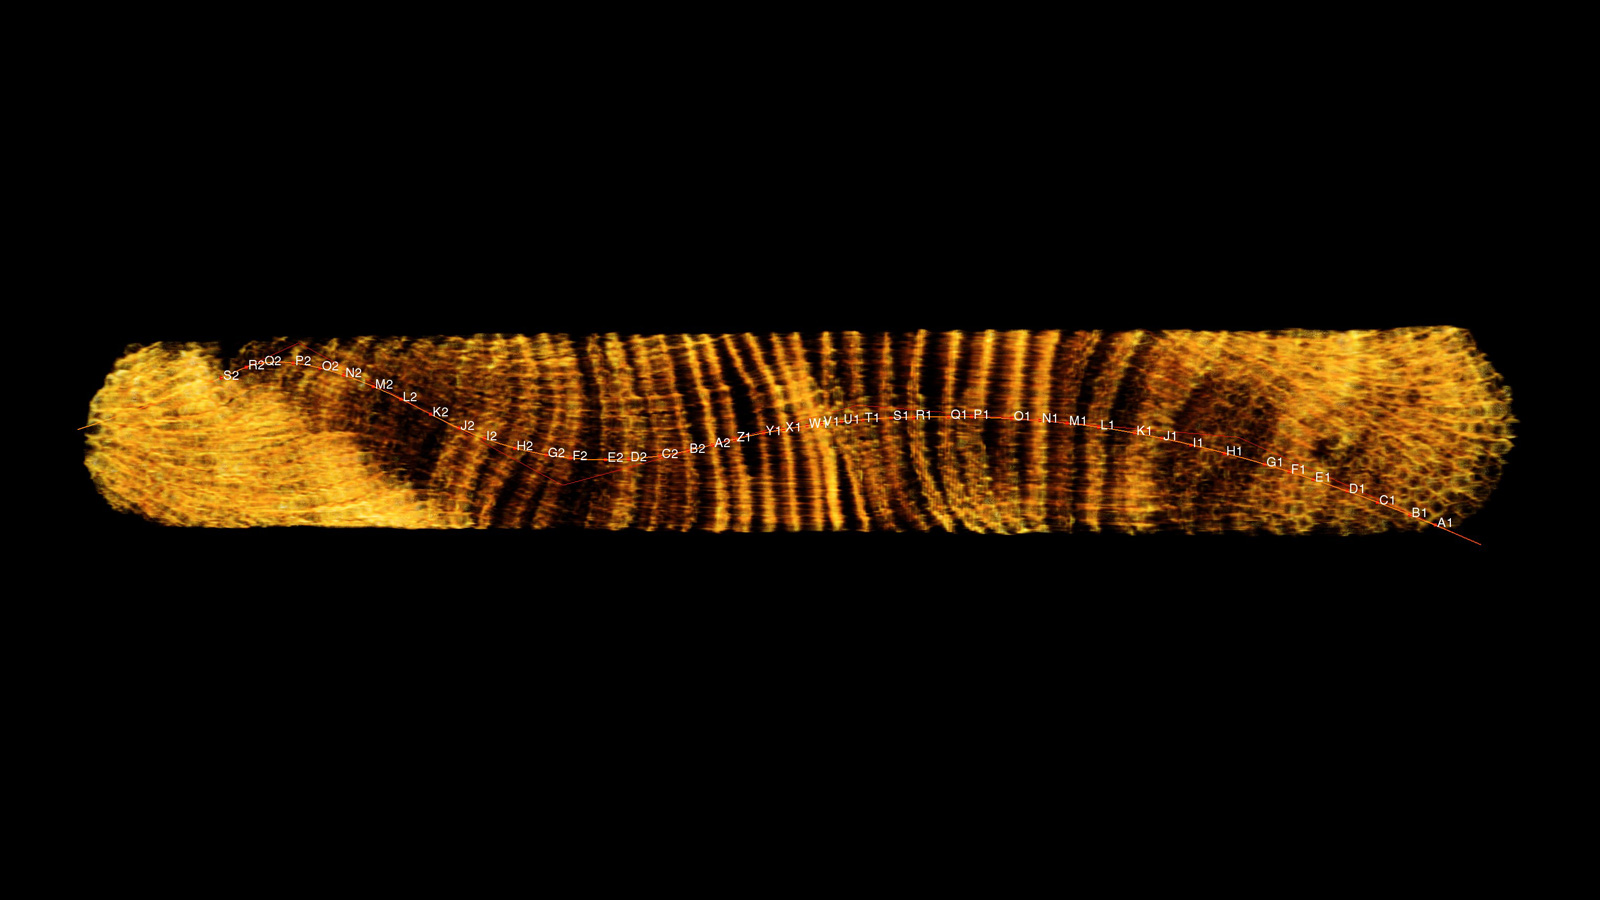 A golden bar displays the coral core horizontally with a black background only the dense bands of the coral are seen as gold seeming like a series of pringles chips laid horizontally